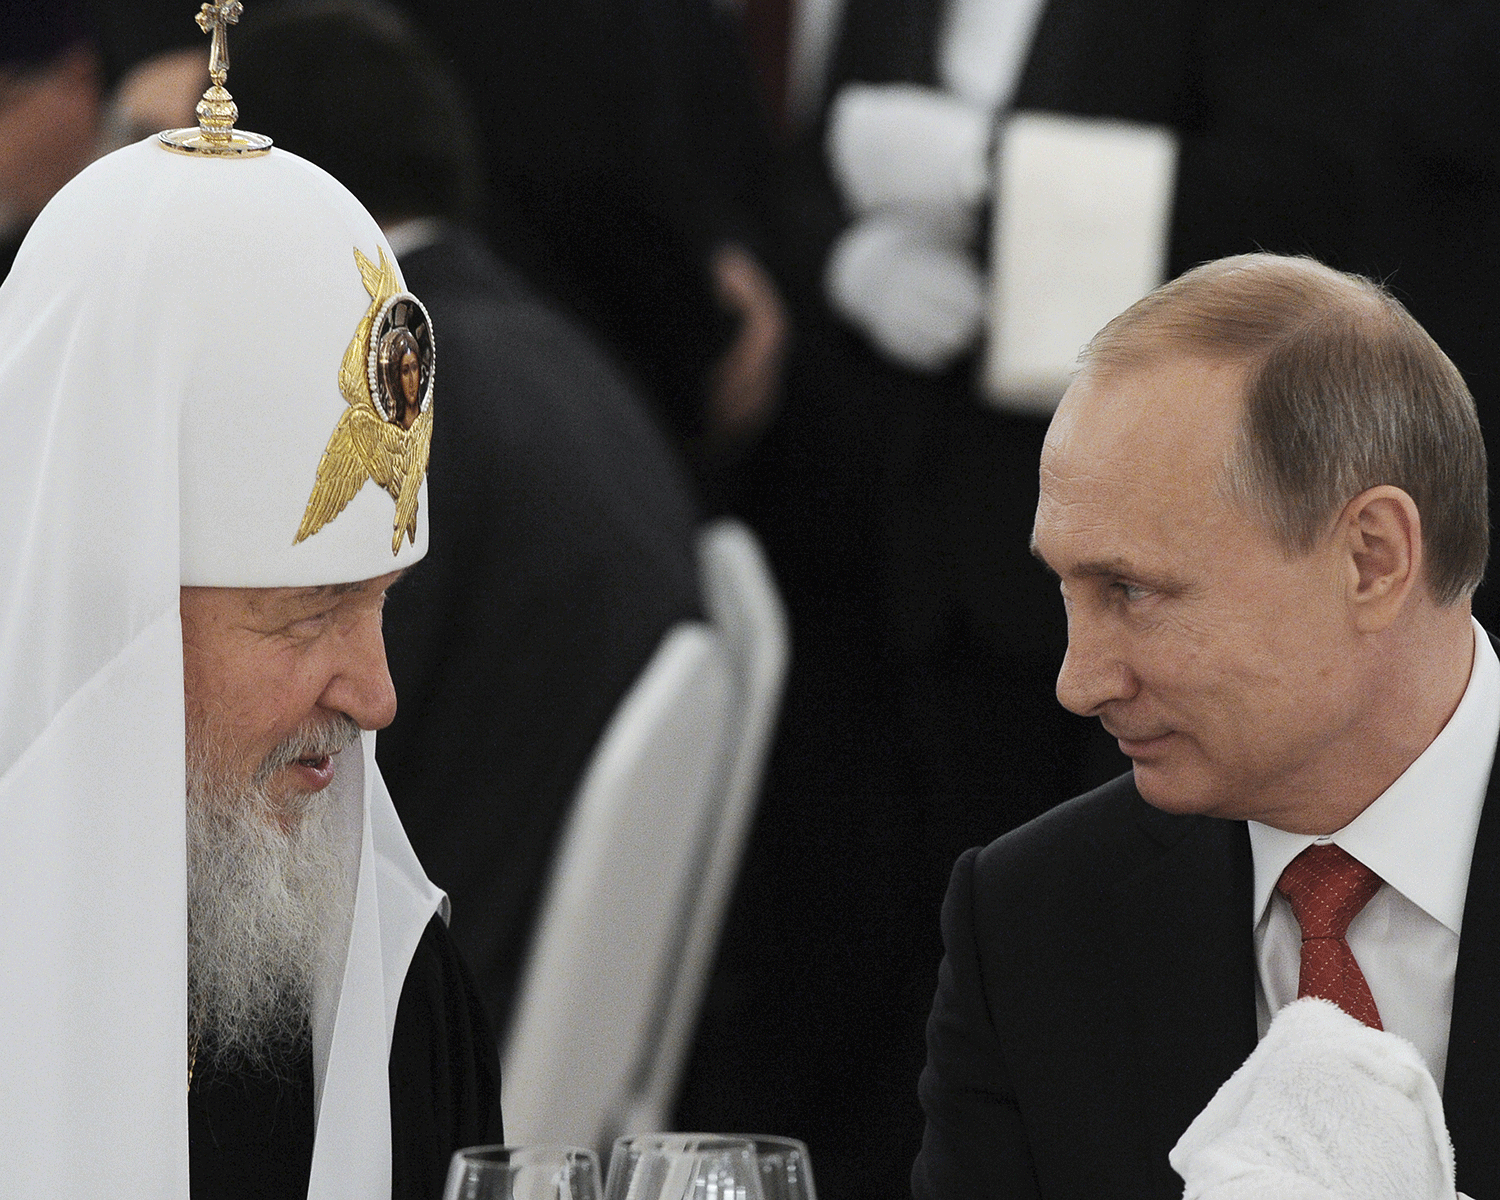 Russia's president Vladimir Putin and Patriarch of the Russian Orthodox Church Kirill have reportedly tightened links between the Kremlin and Church